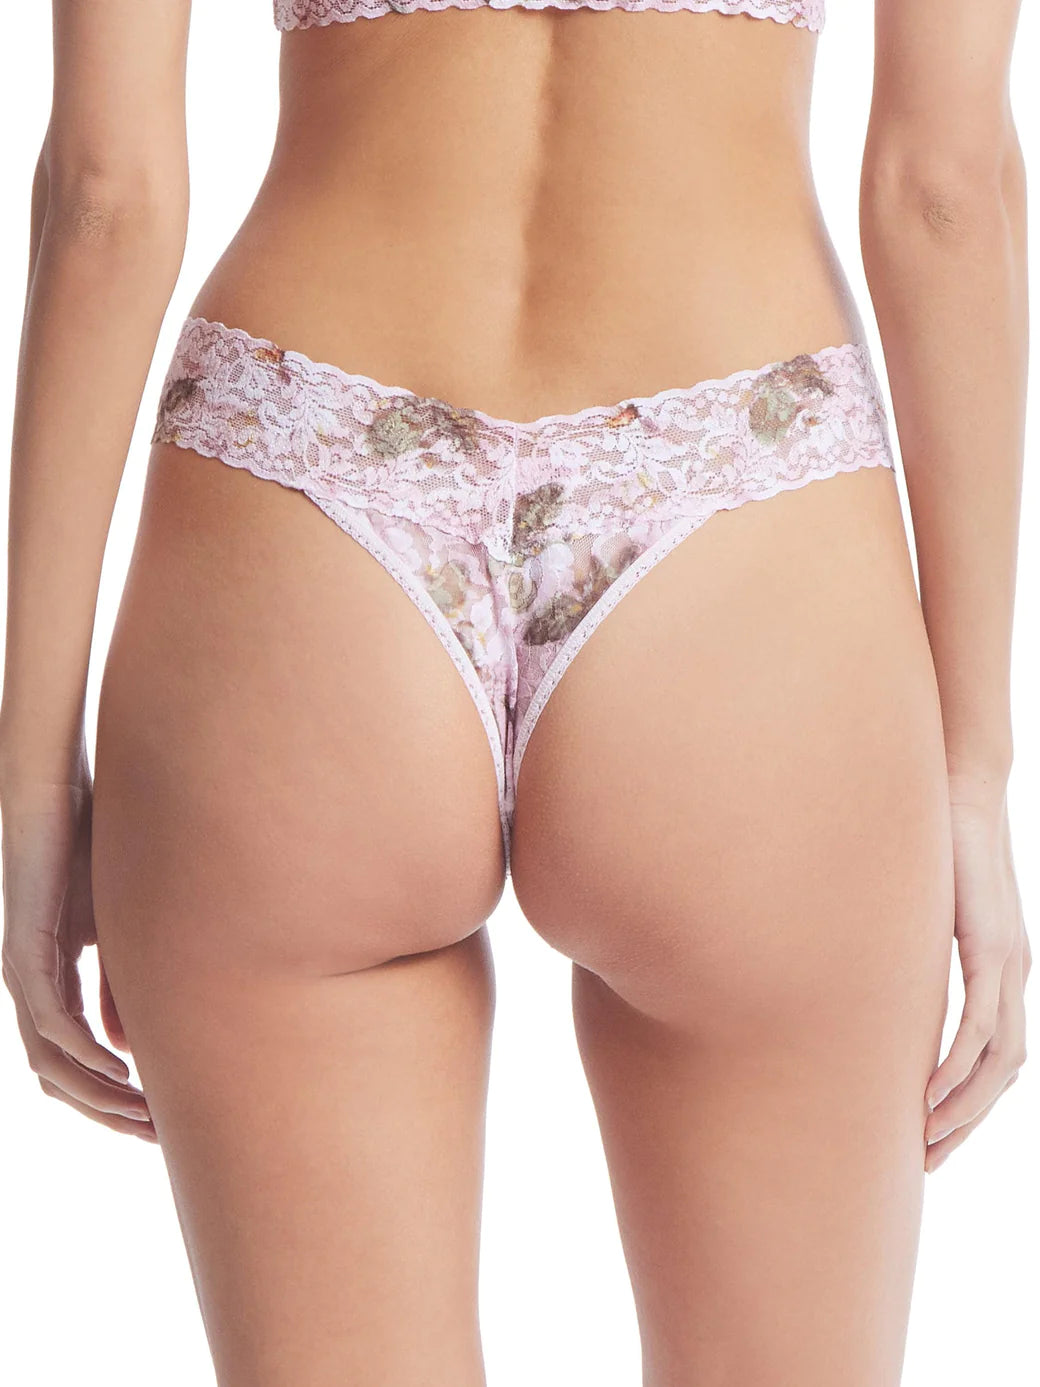 Original Rise Signature Lace Thong In Antique Lily - Hanky Panky